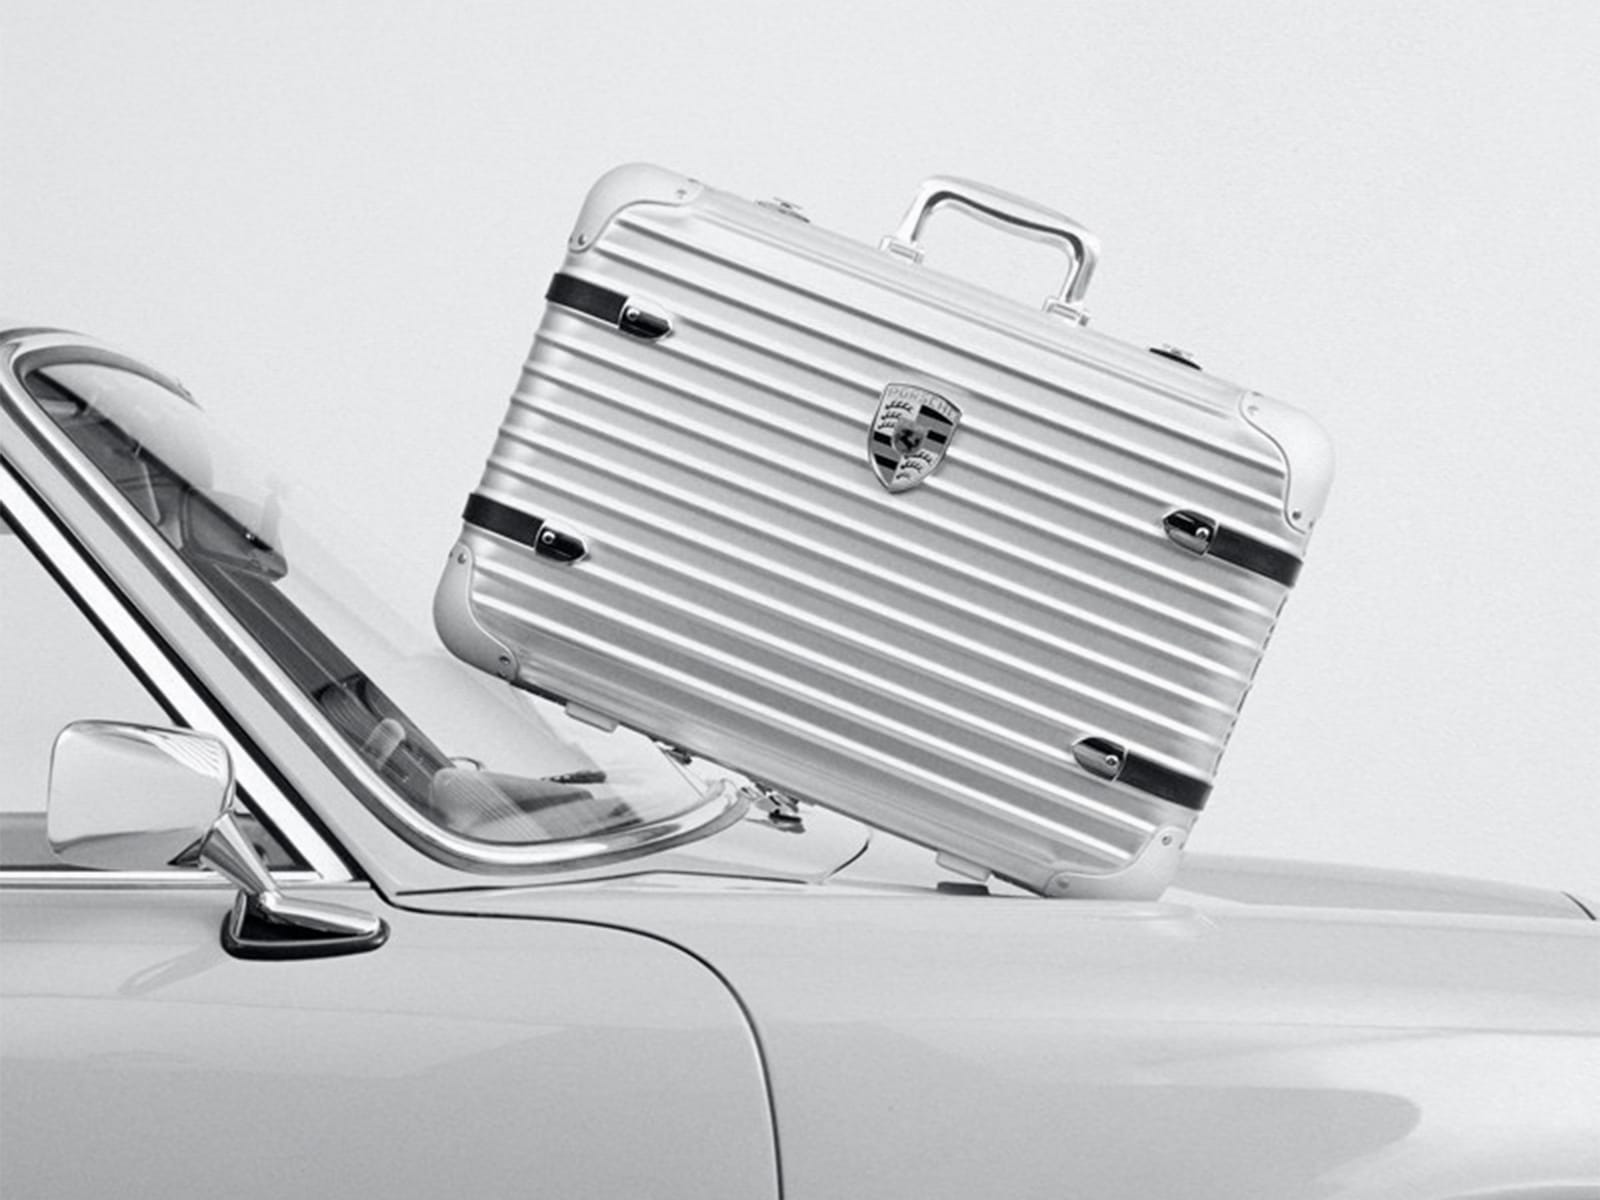 Rimowa x Porsche: An ode to craftsmanship and attention to detail